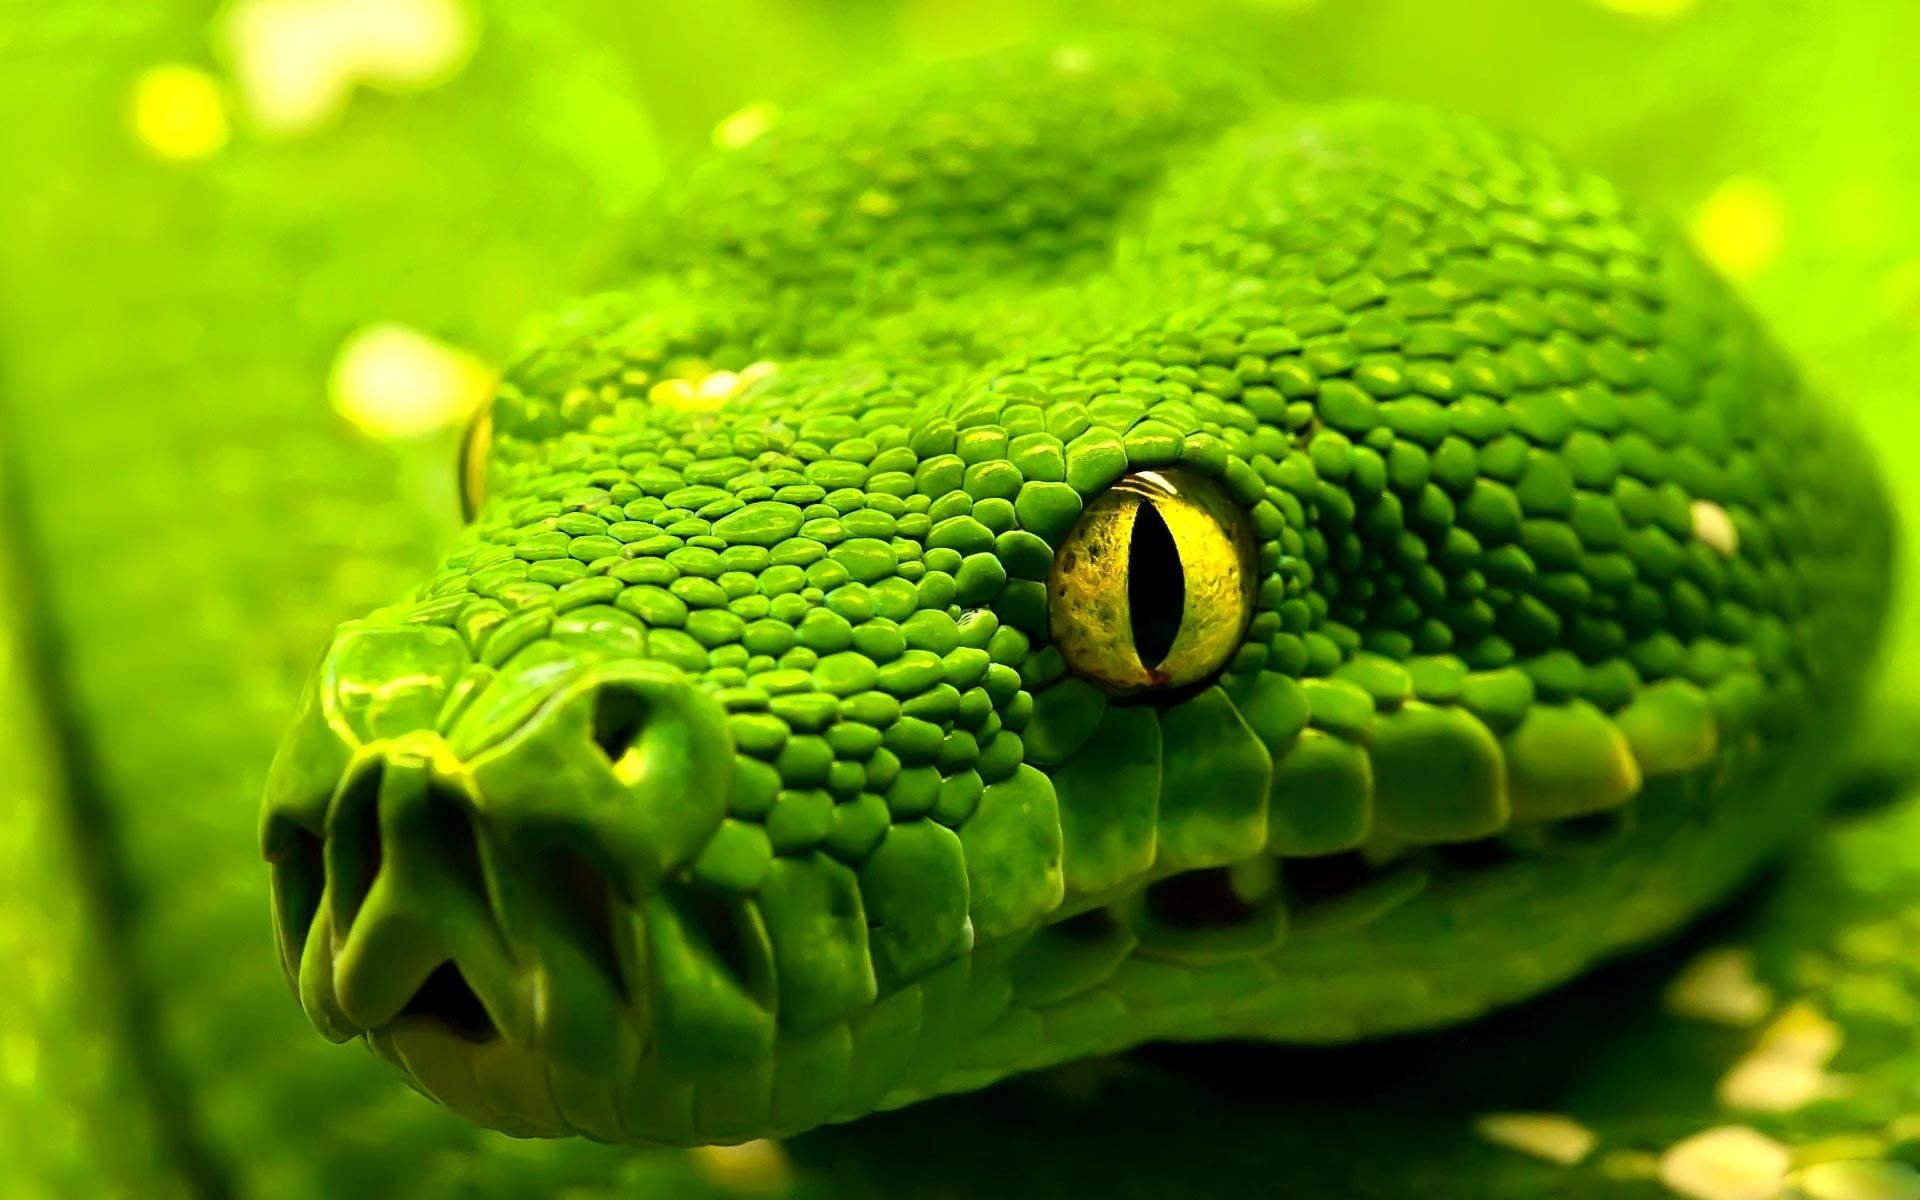 HD Snake Wallpaper: Appstore for Android